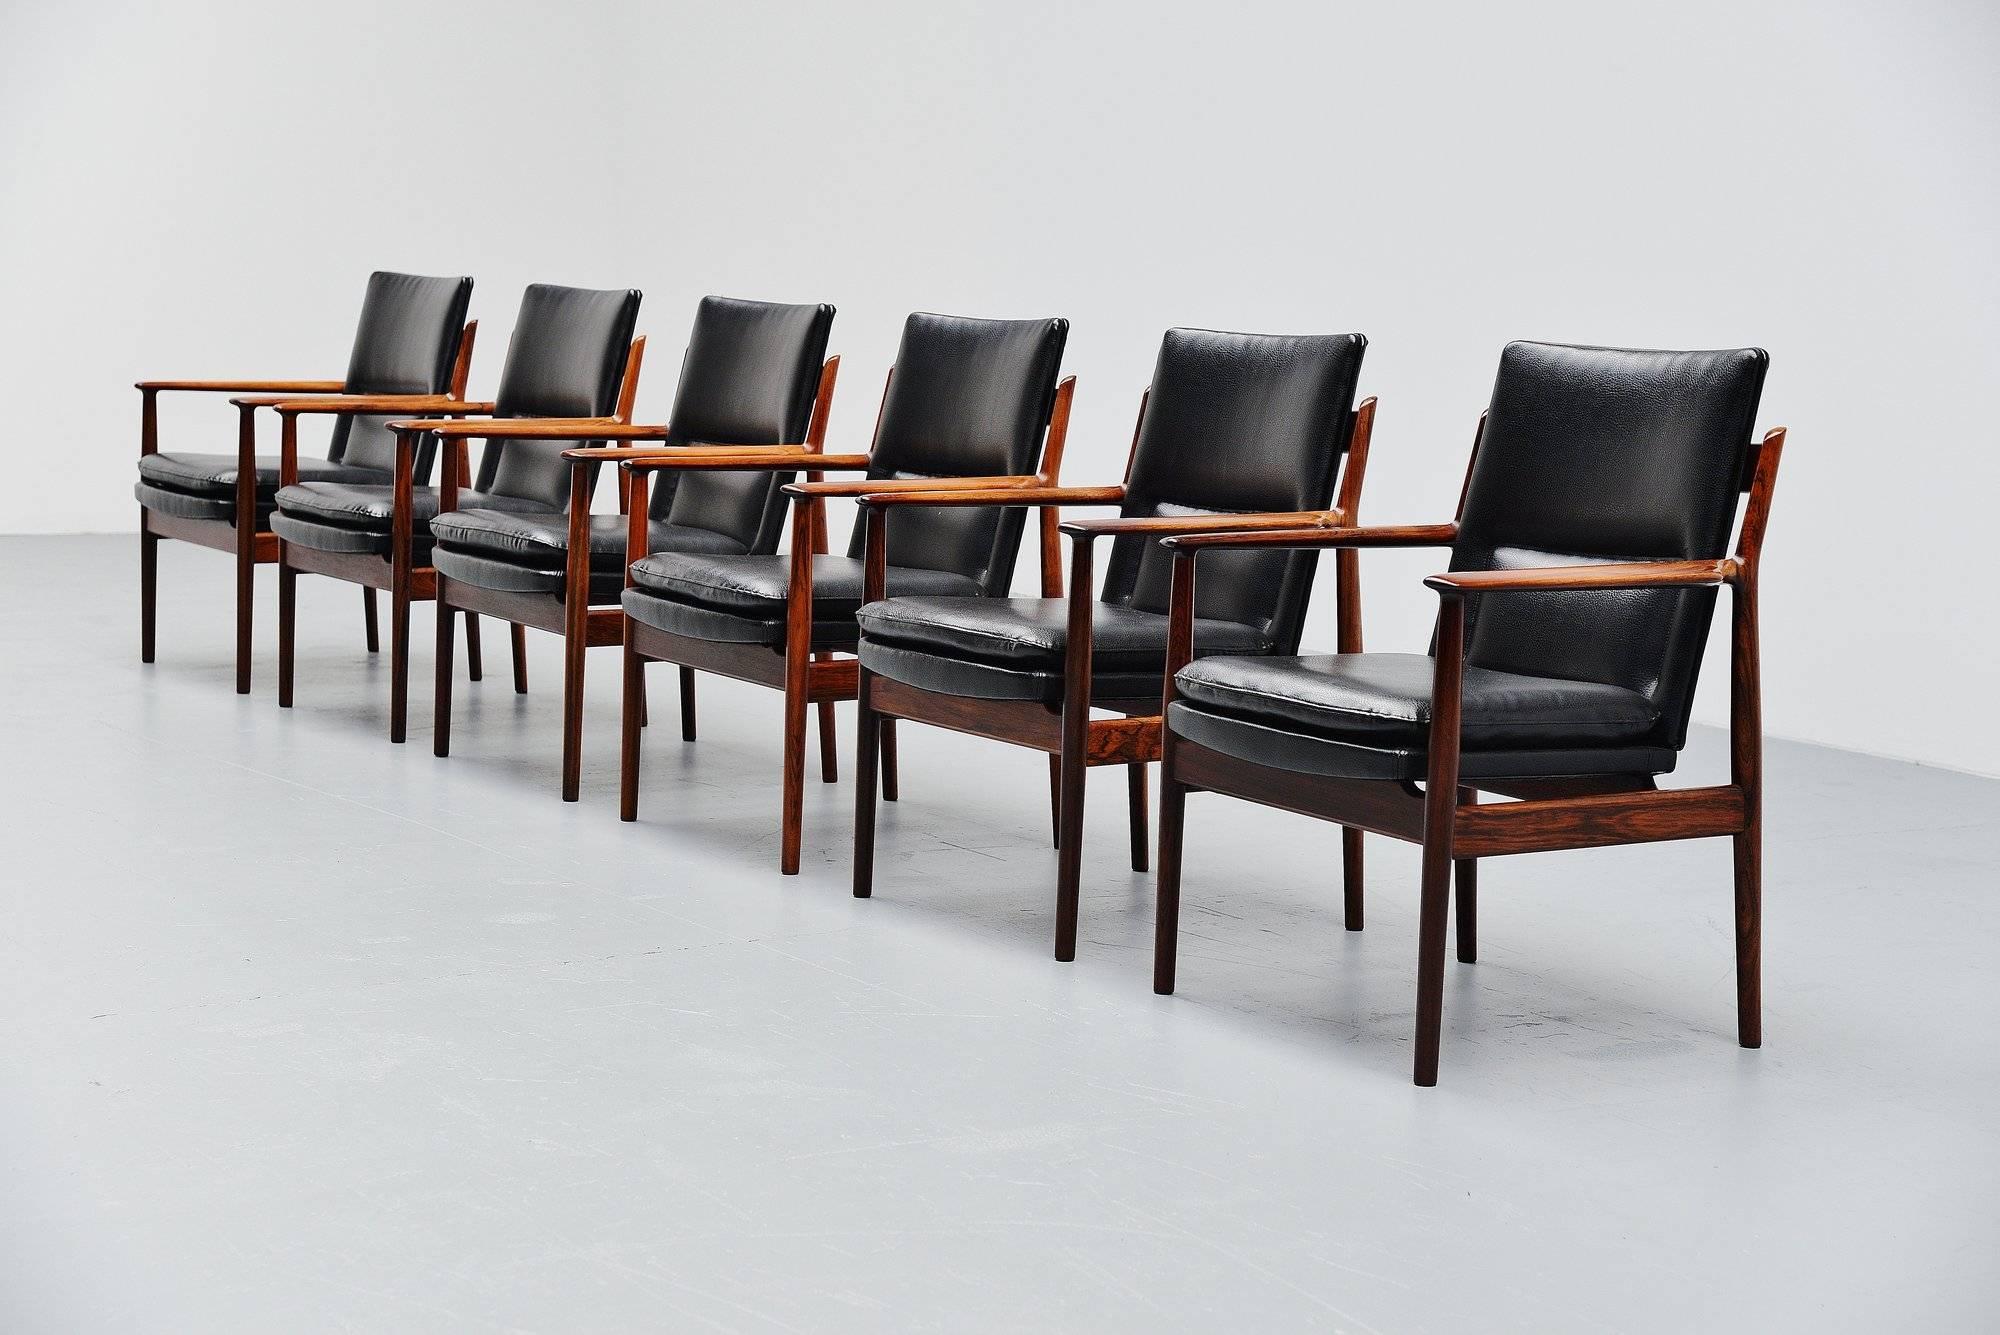 Fantastic conference chairs designed by Arne Vodder and manufactured by Sibast Mobler, Denmark 1960. The chairs have a solid rosewood frame and black leather upholstery. These chairs are hard to find in a set of six. Comfortable conference chairs in